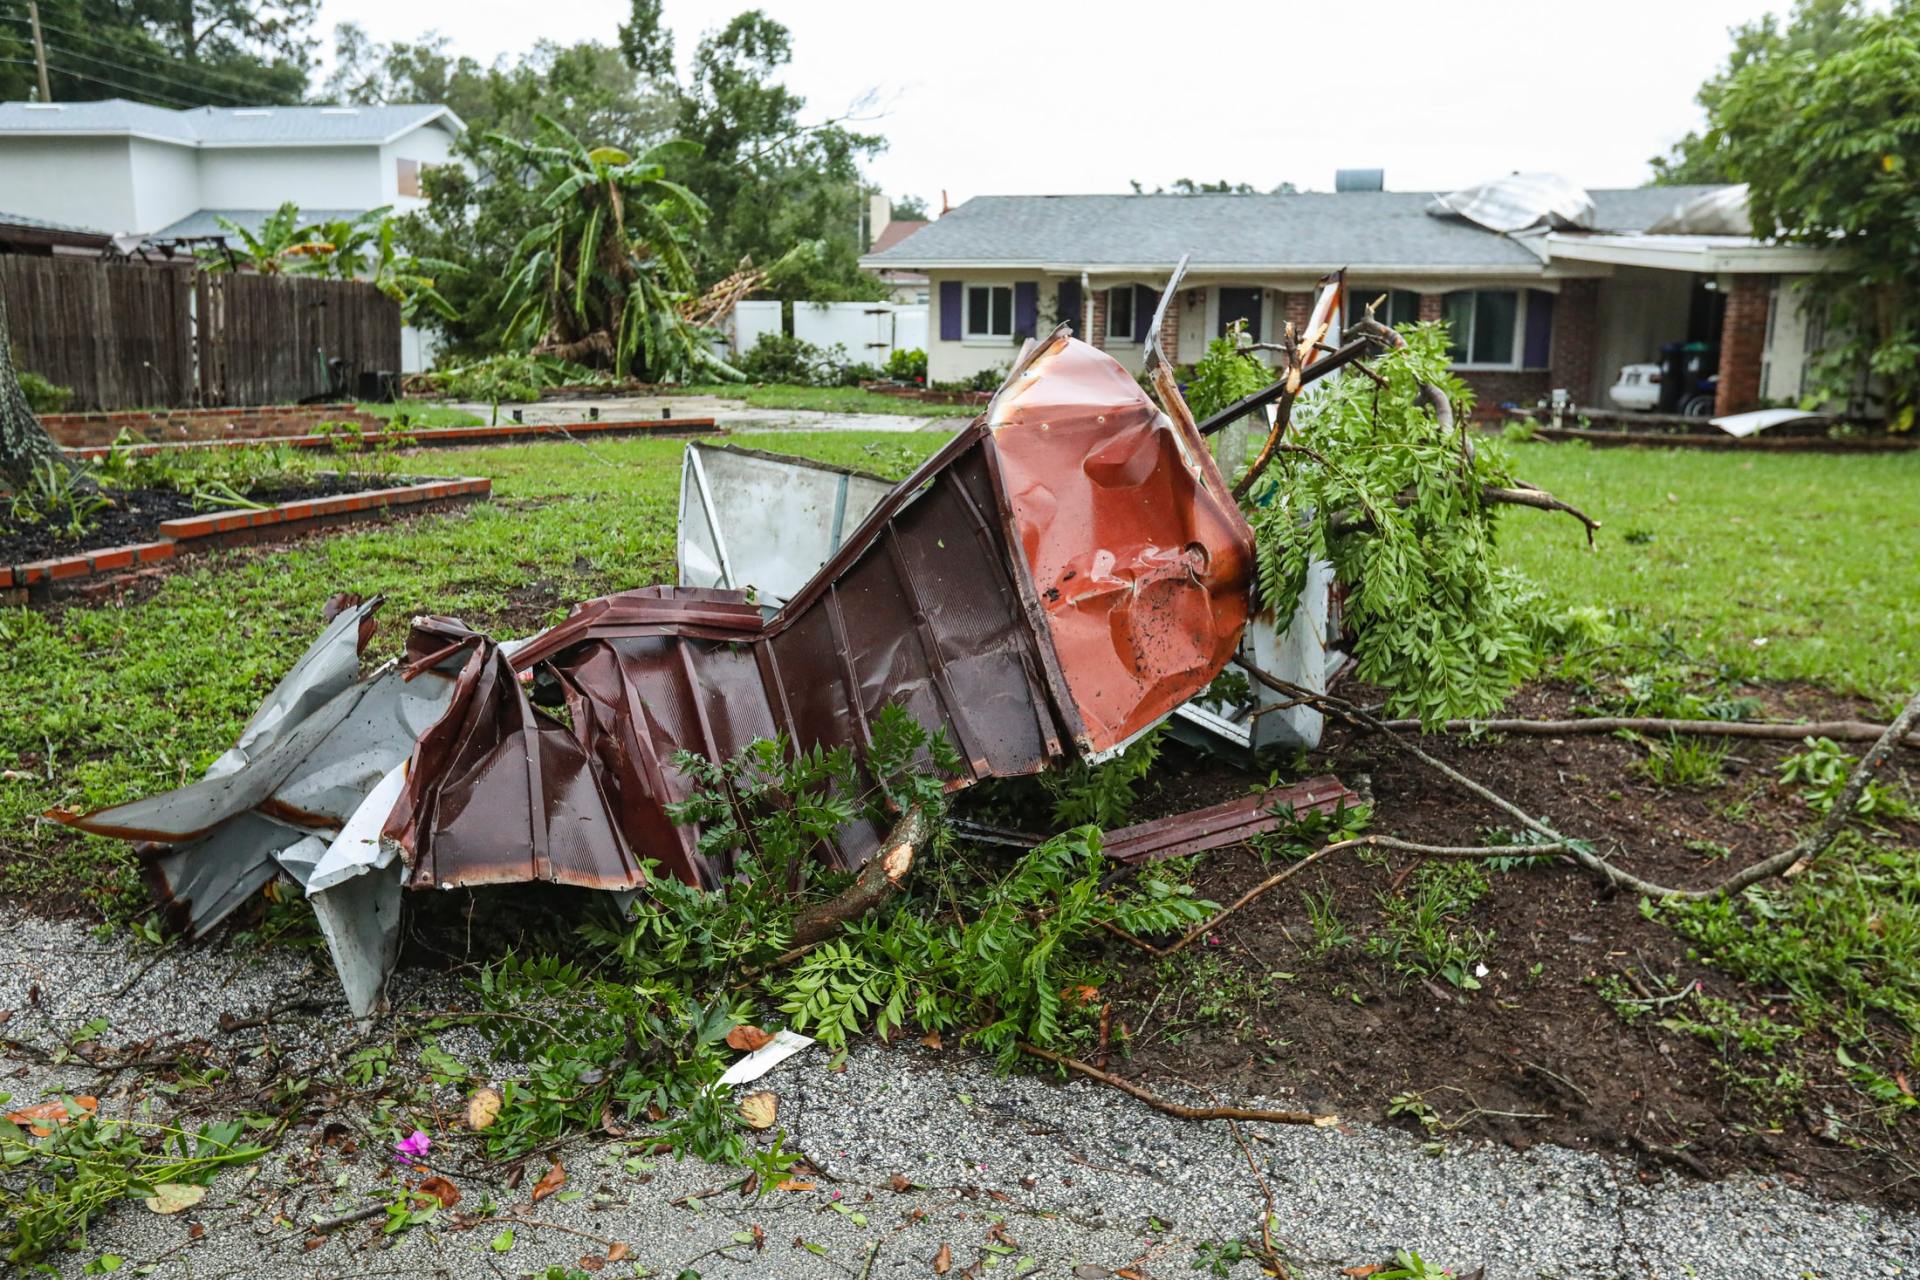 Image of tornado damage with trees and shrubs down on house and yard